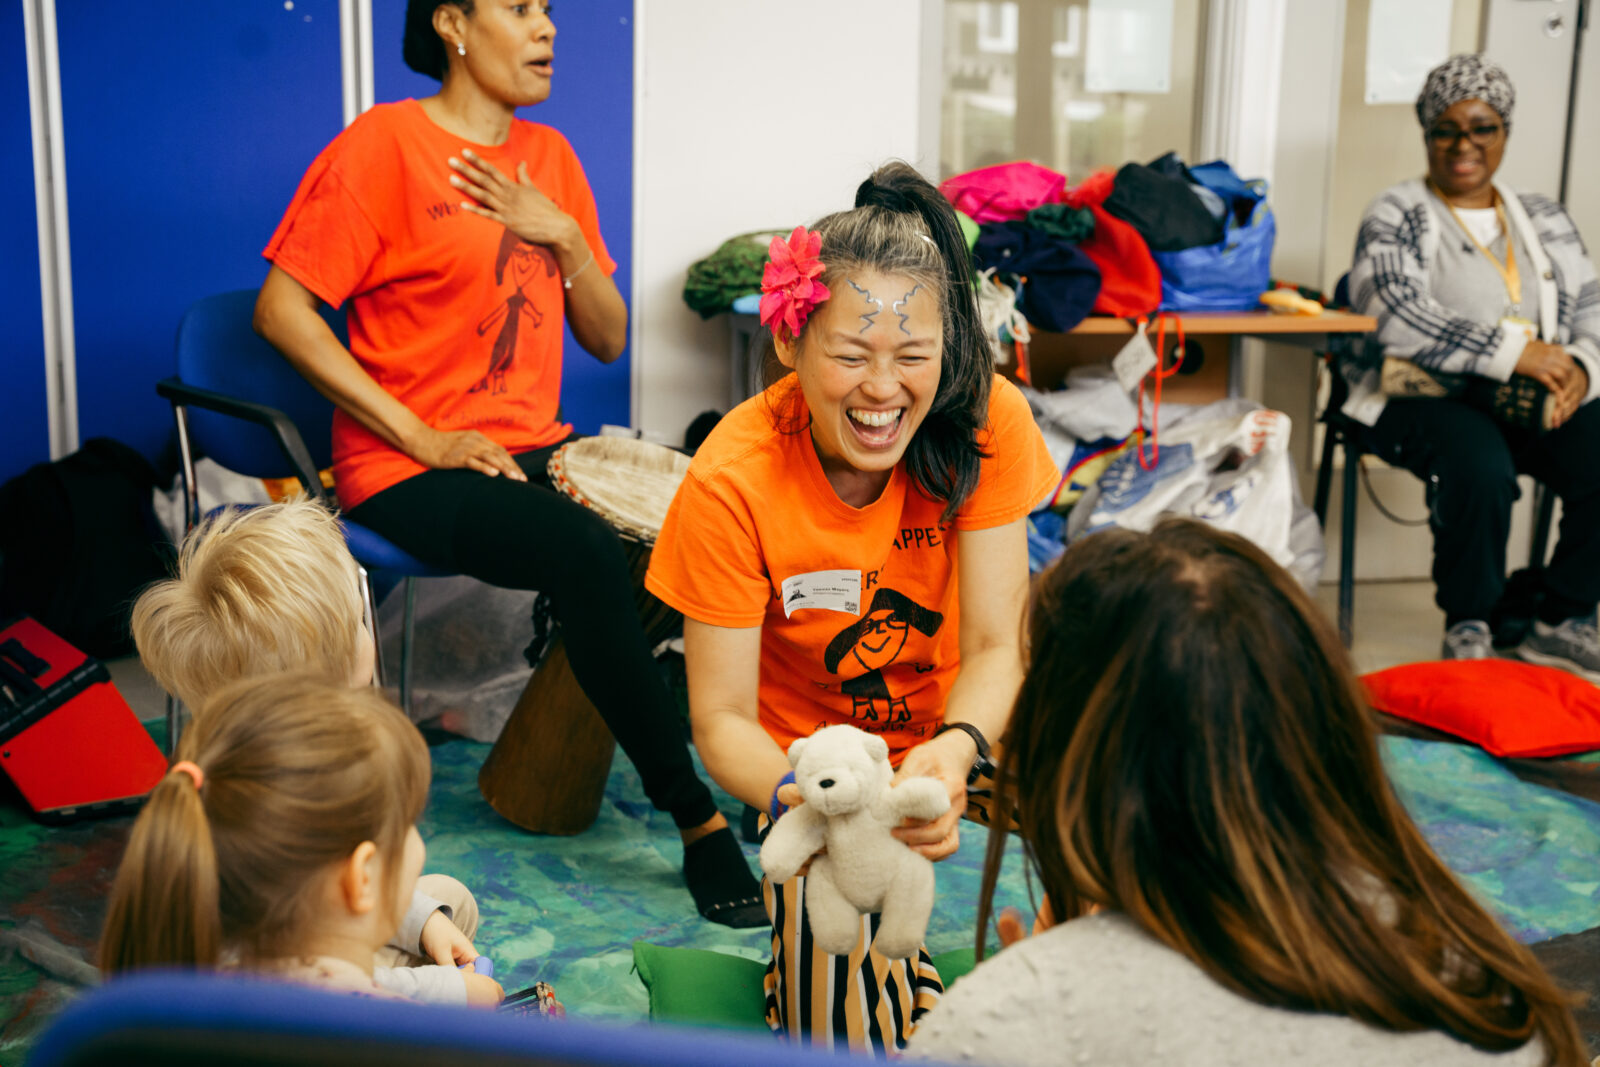 A member of the Whippersnappers team using a small teddy bear to interact with early years children